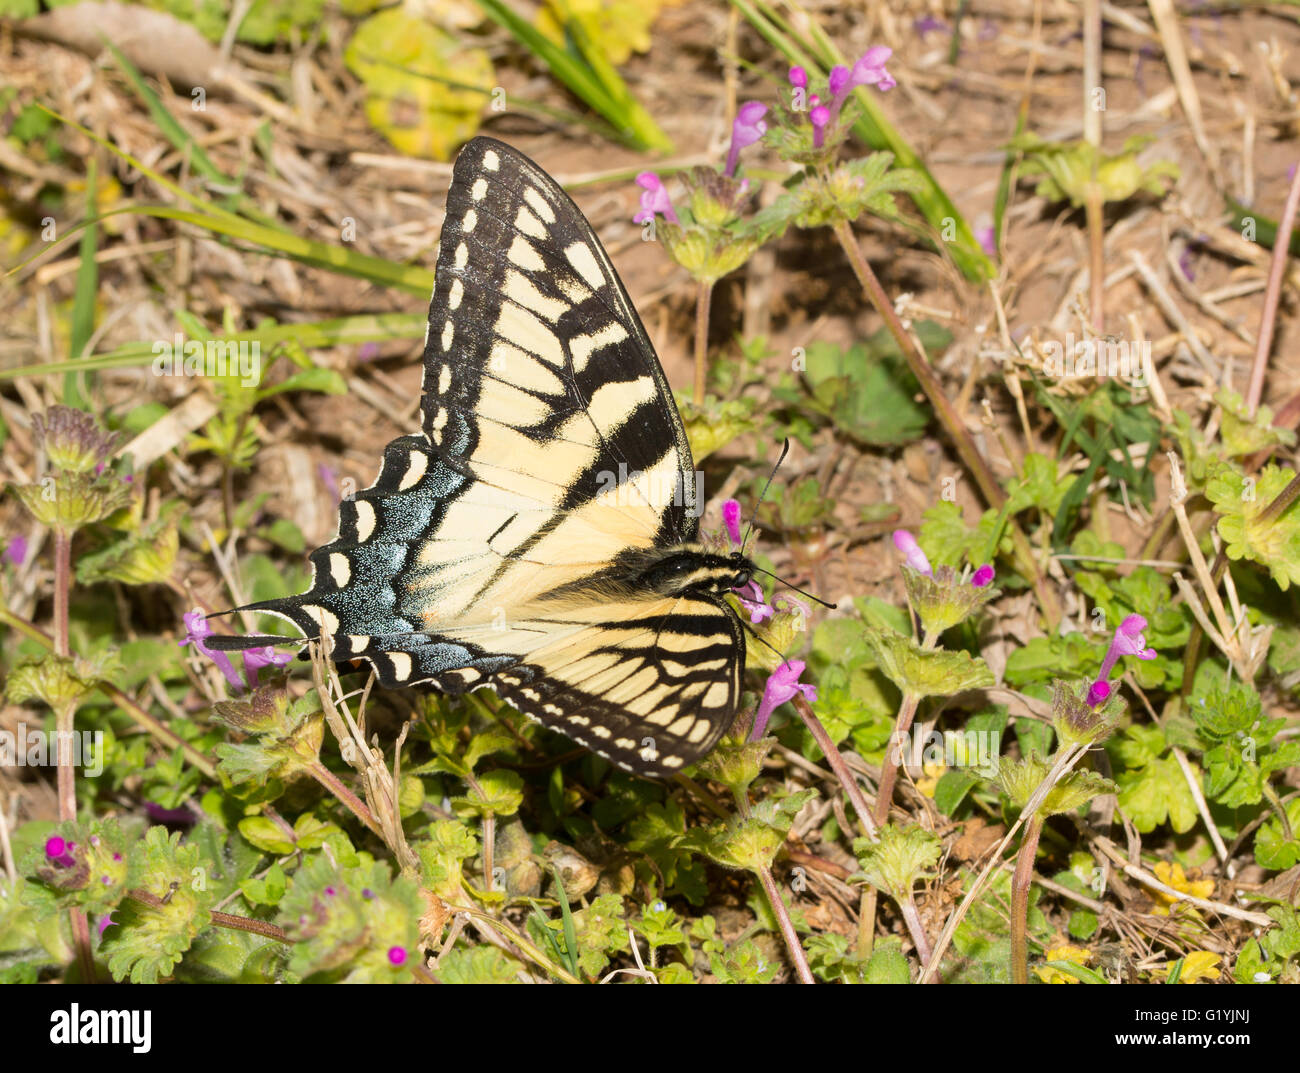 Dorsal view of an Eastern Tiger Swallowtail butterfly feeding on pink Henbit flowers Stock Photo